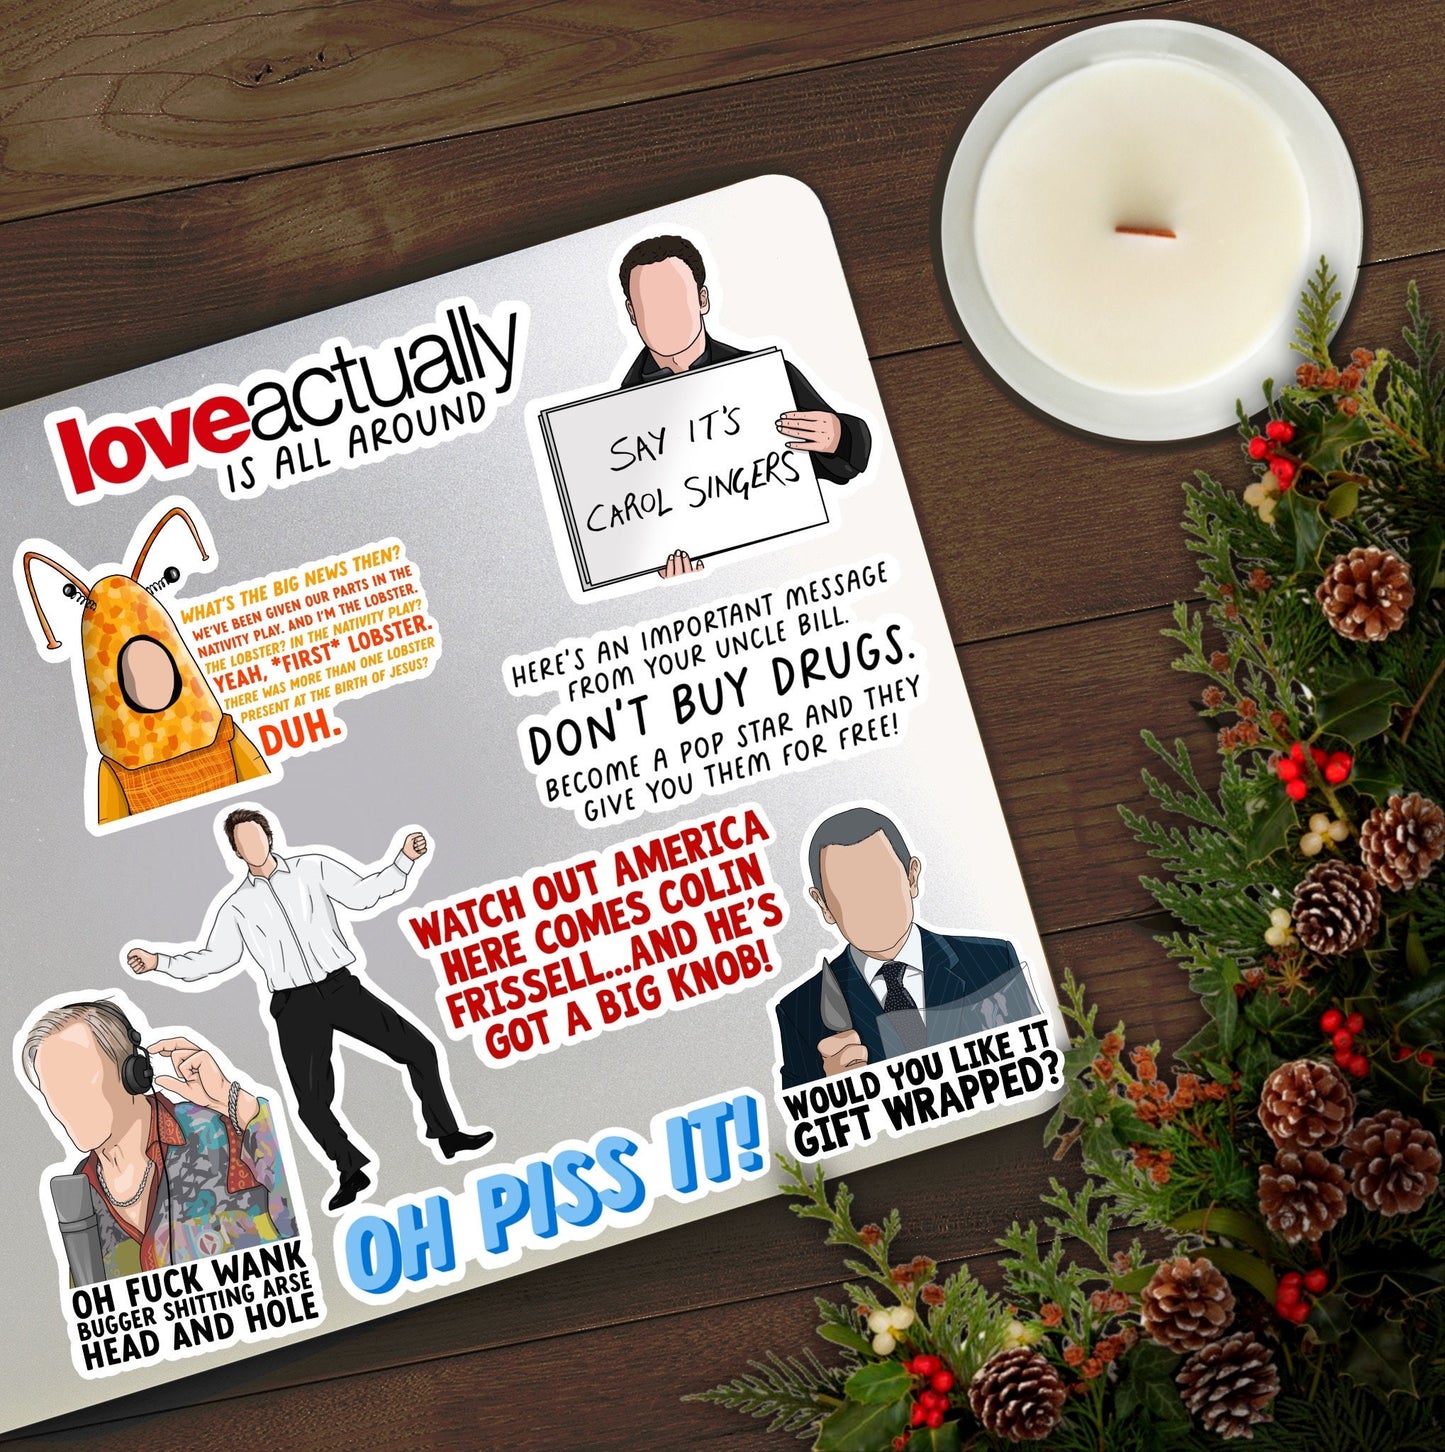 Would You Like It Gift Wrapped? | Love Actually Stickers